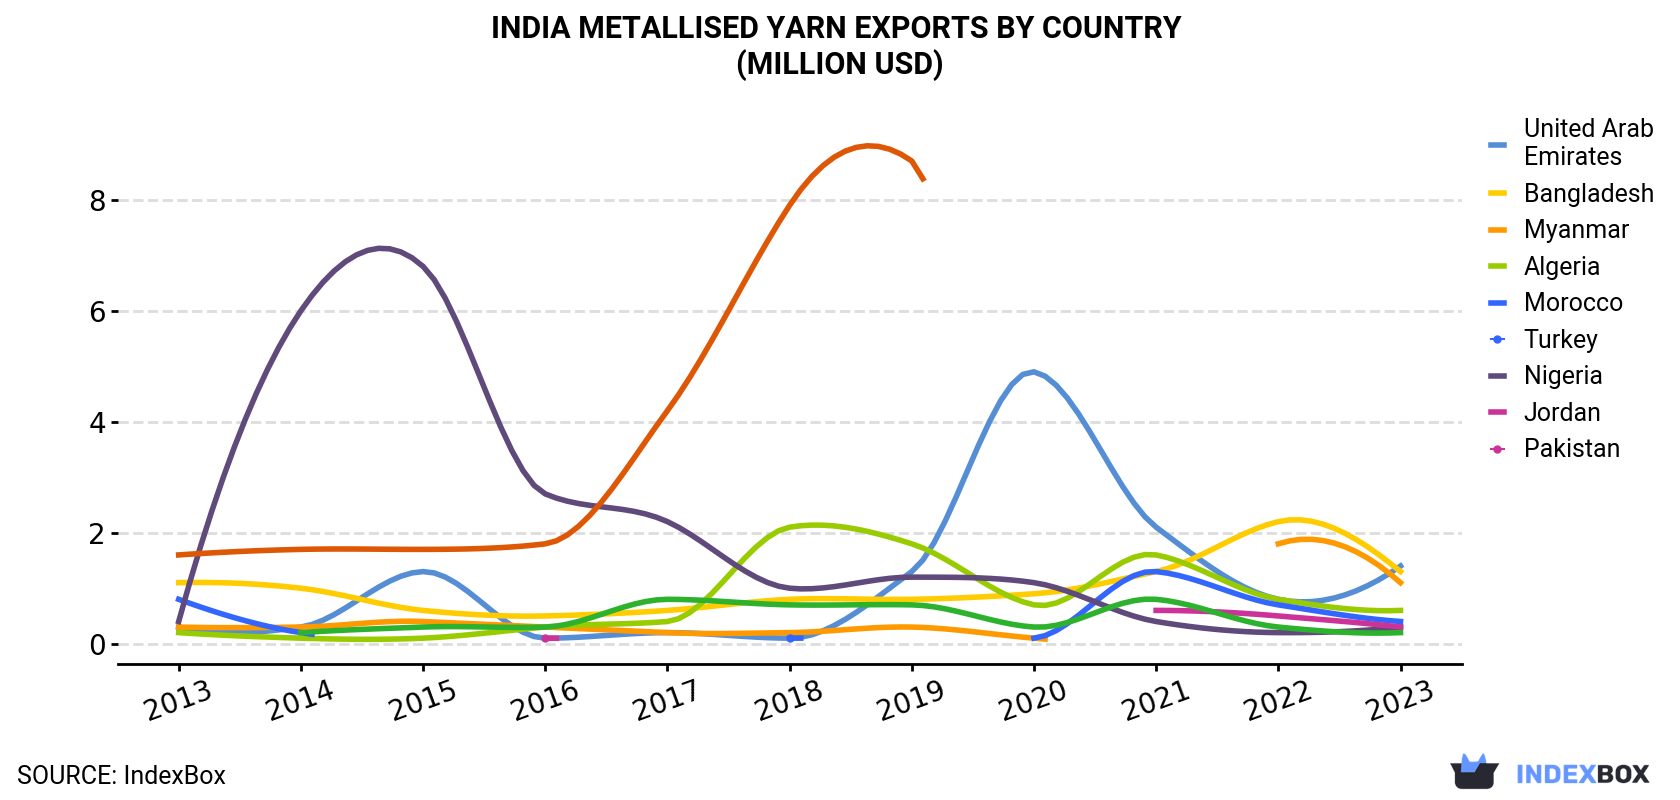 India Metallised Yarn Exports By Country (Million USD)